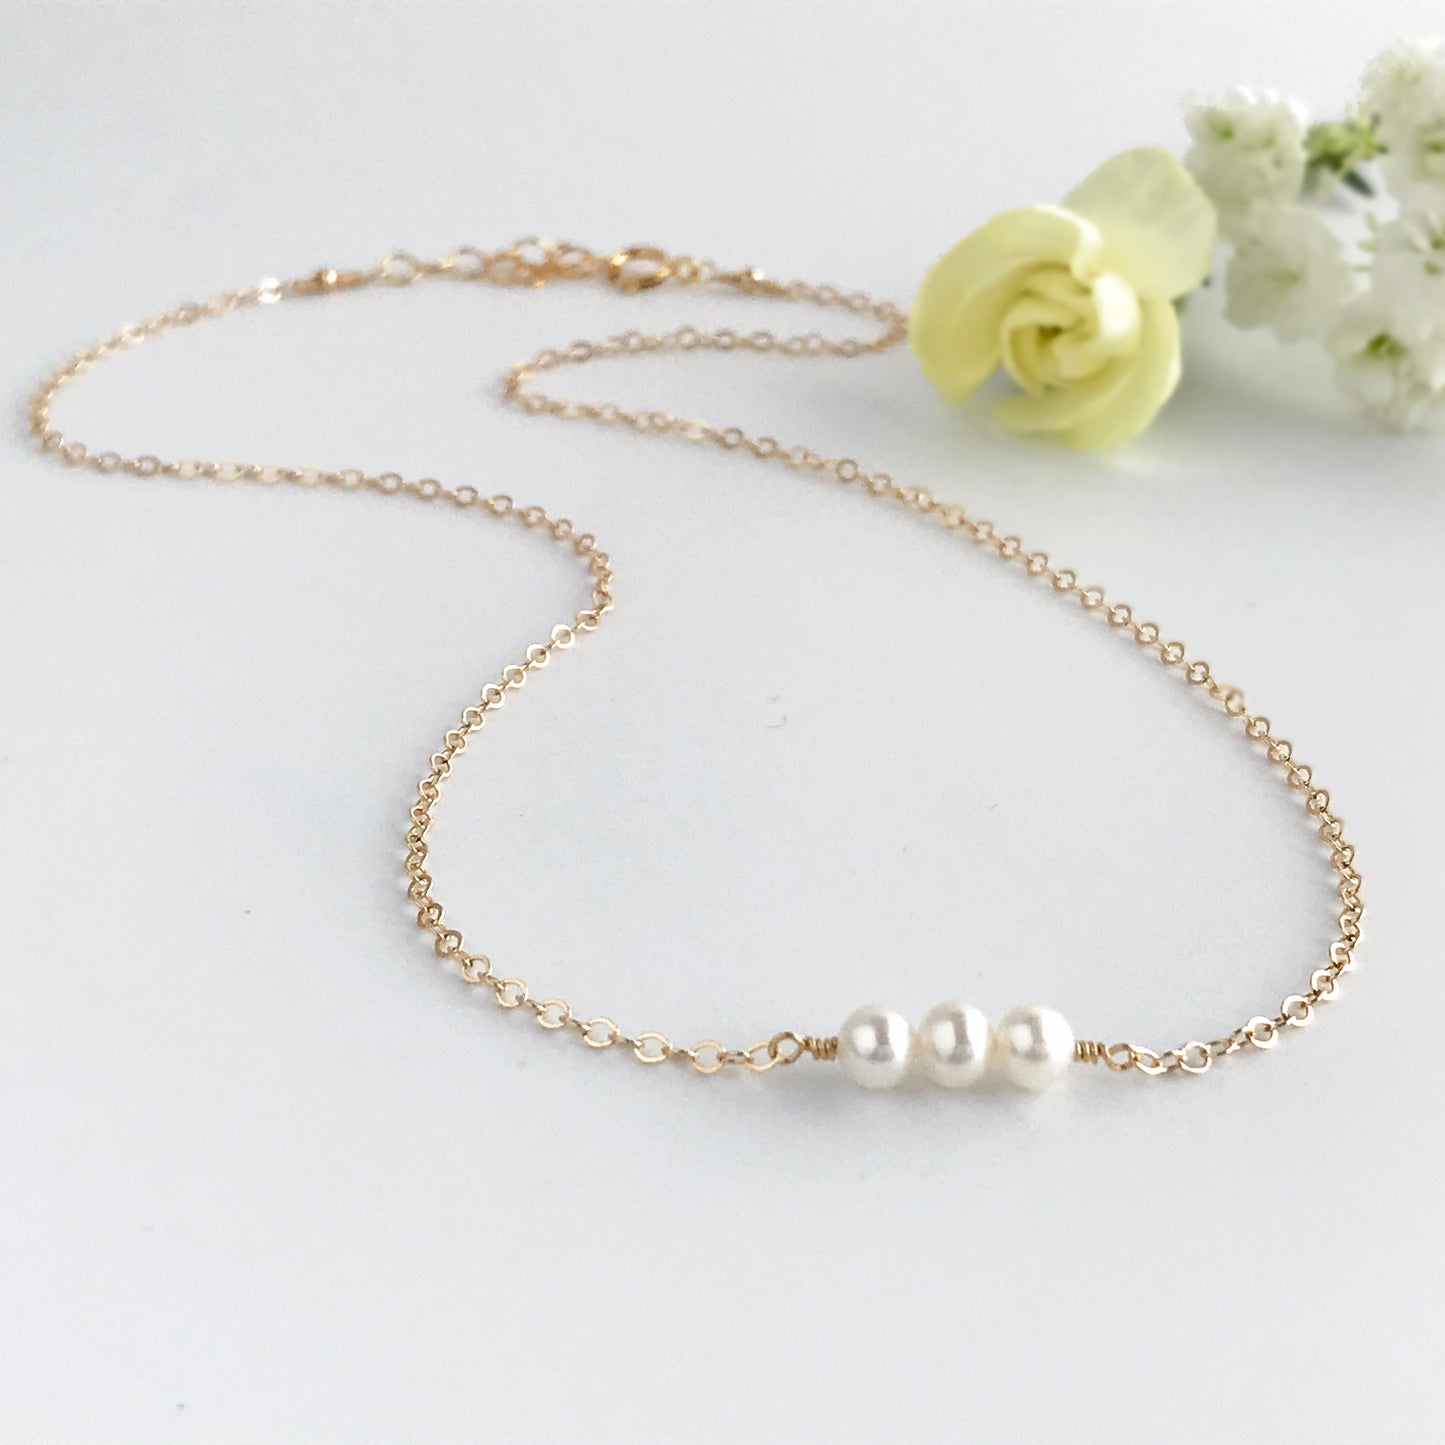 3 Pearl Necklace - Dainty Pearl Necklace